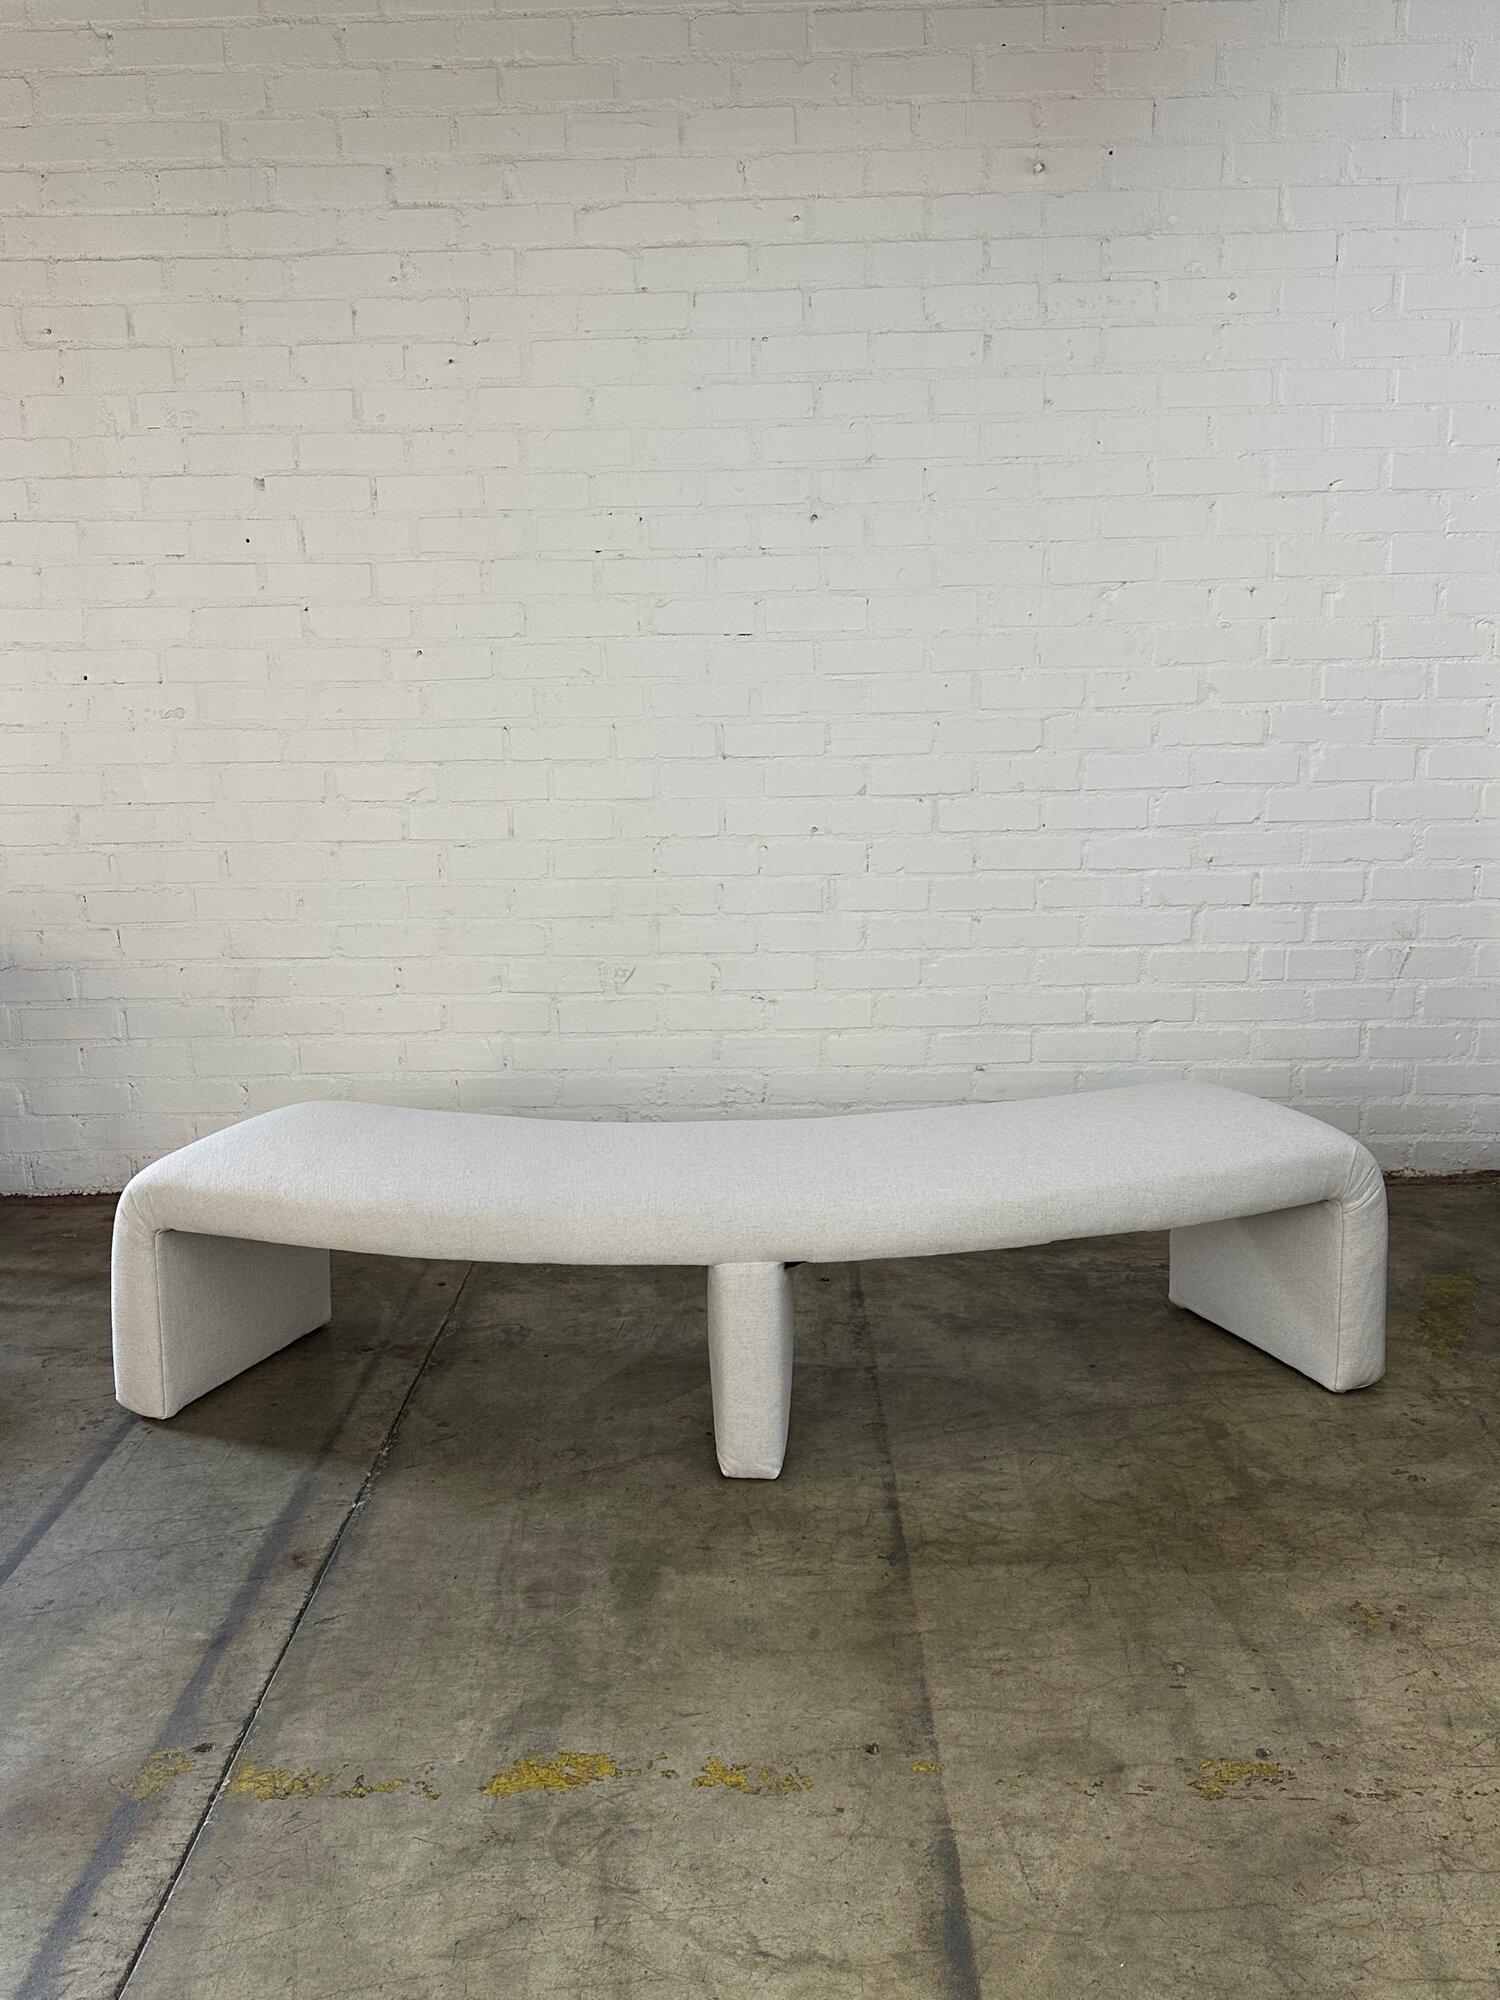 Organic Modern Handcrafted Curved Waterfall Bench For Sale